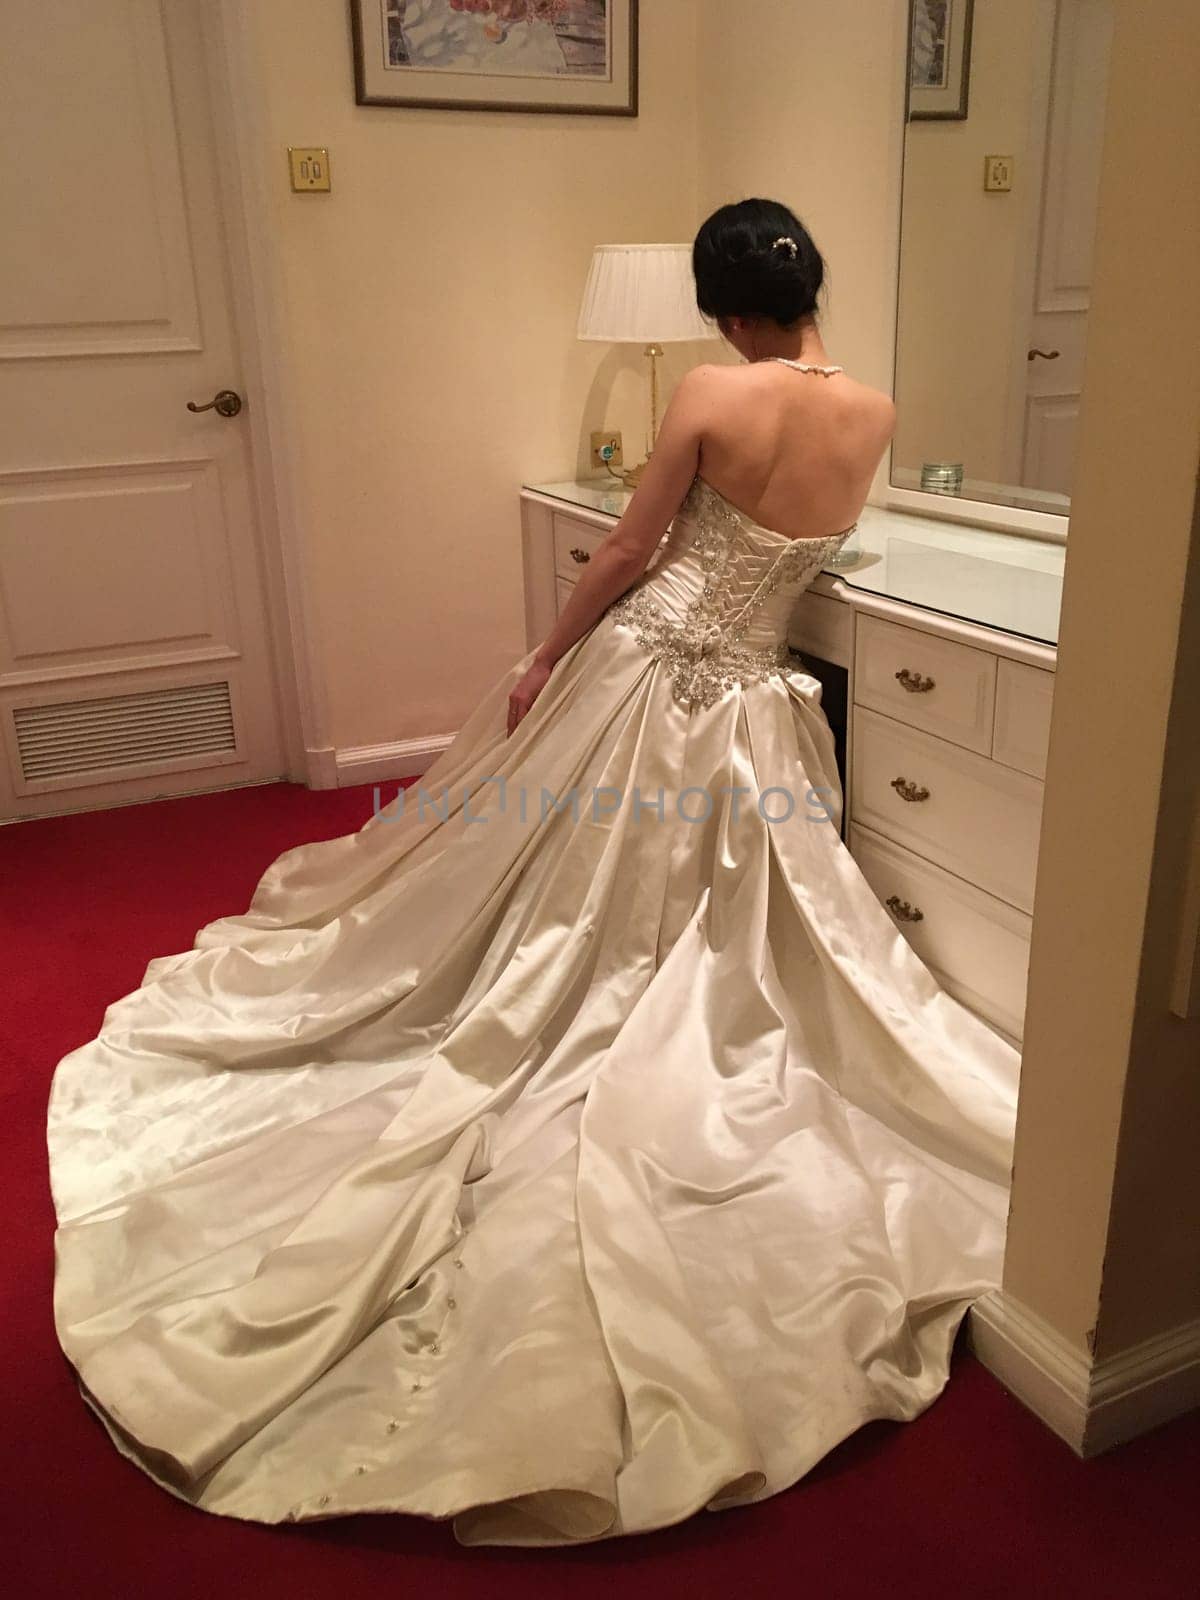 A bride in a white wedding dress with a long train sits on a vanity table in a room with red carpet and white walls.